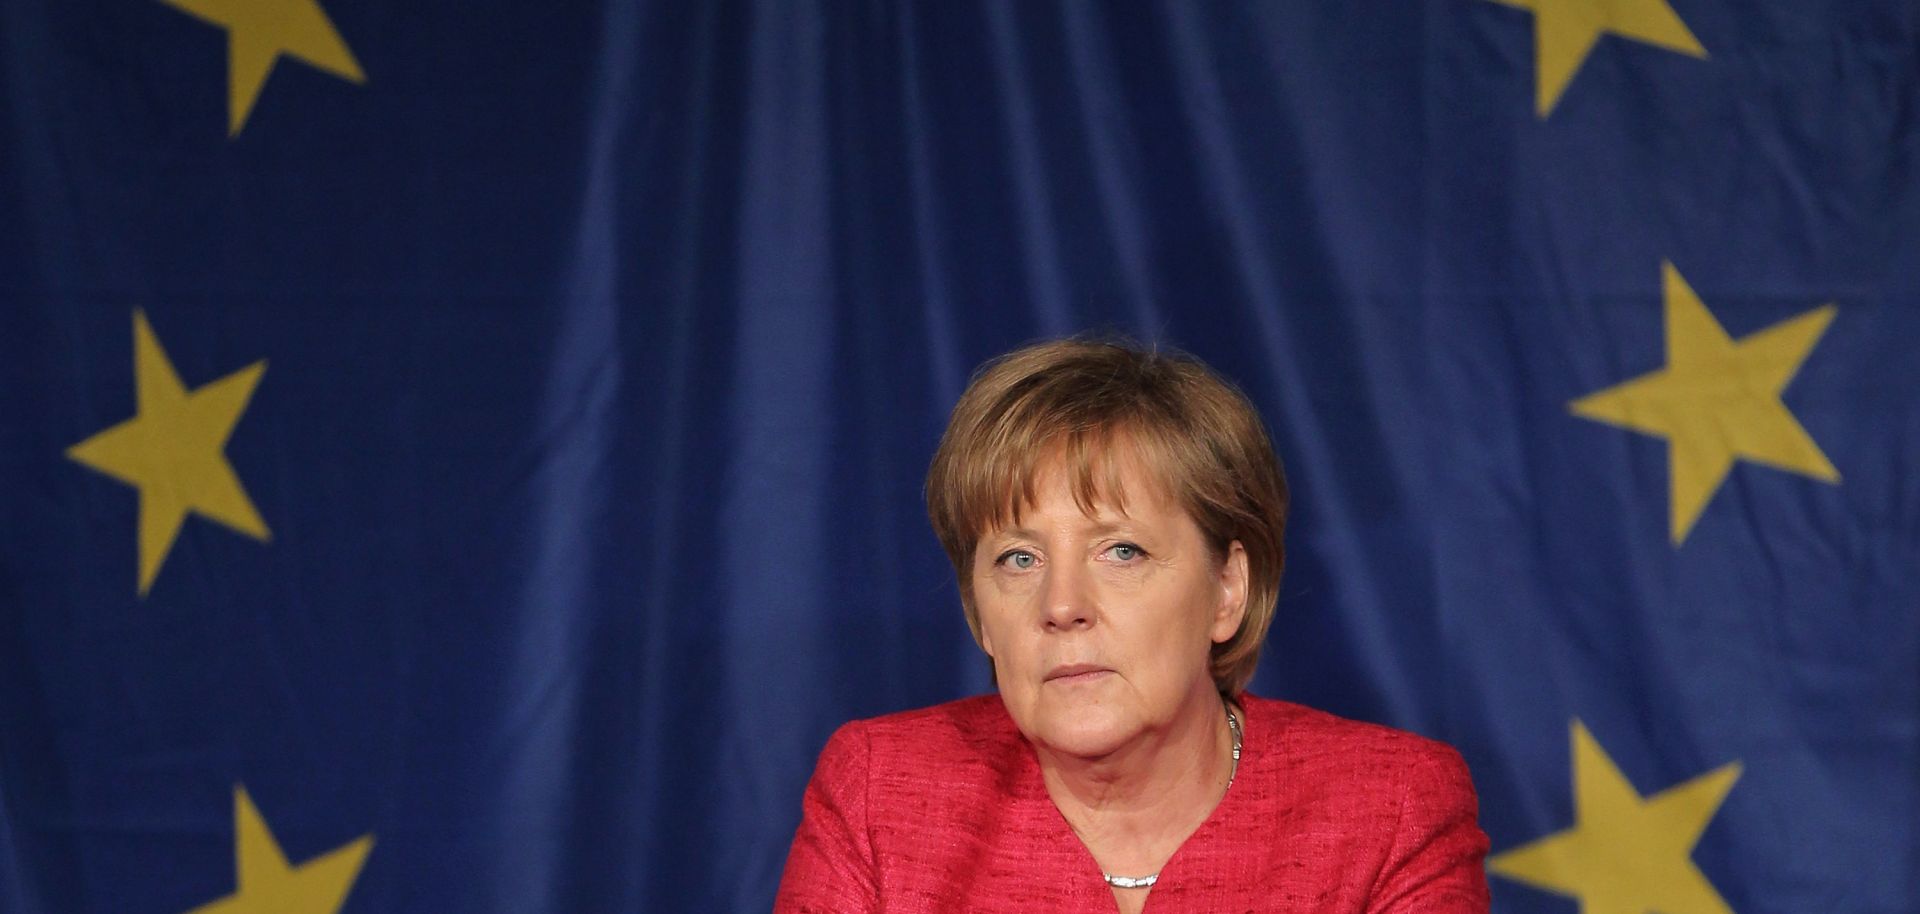 German Chancellor Angela Merkel sits in front of a flag of the European Union.